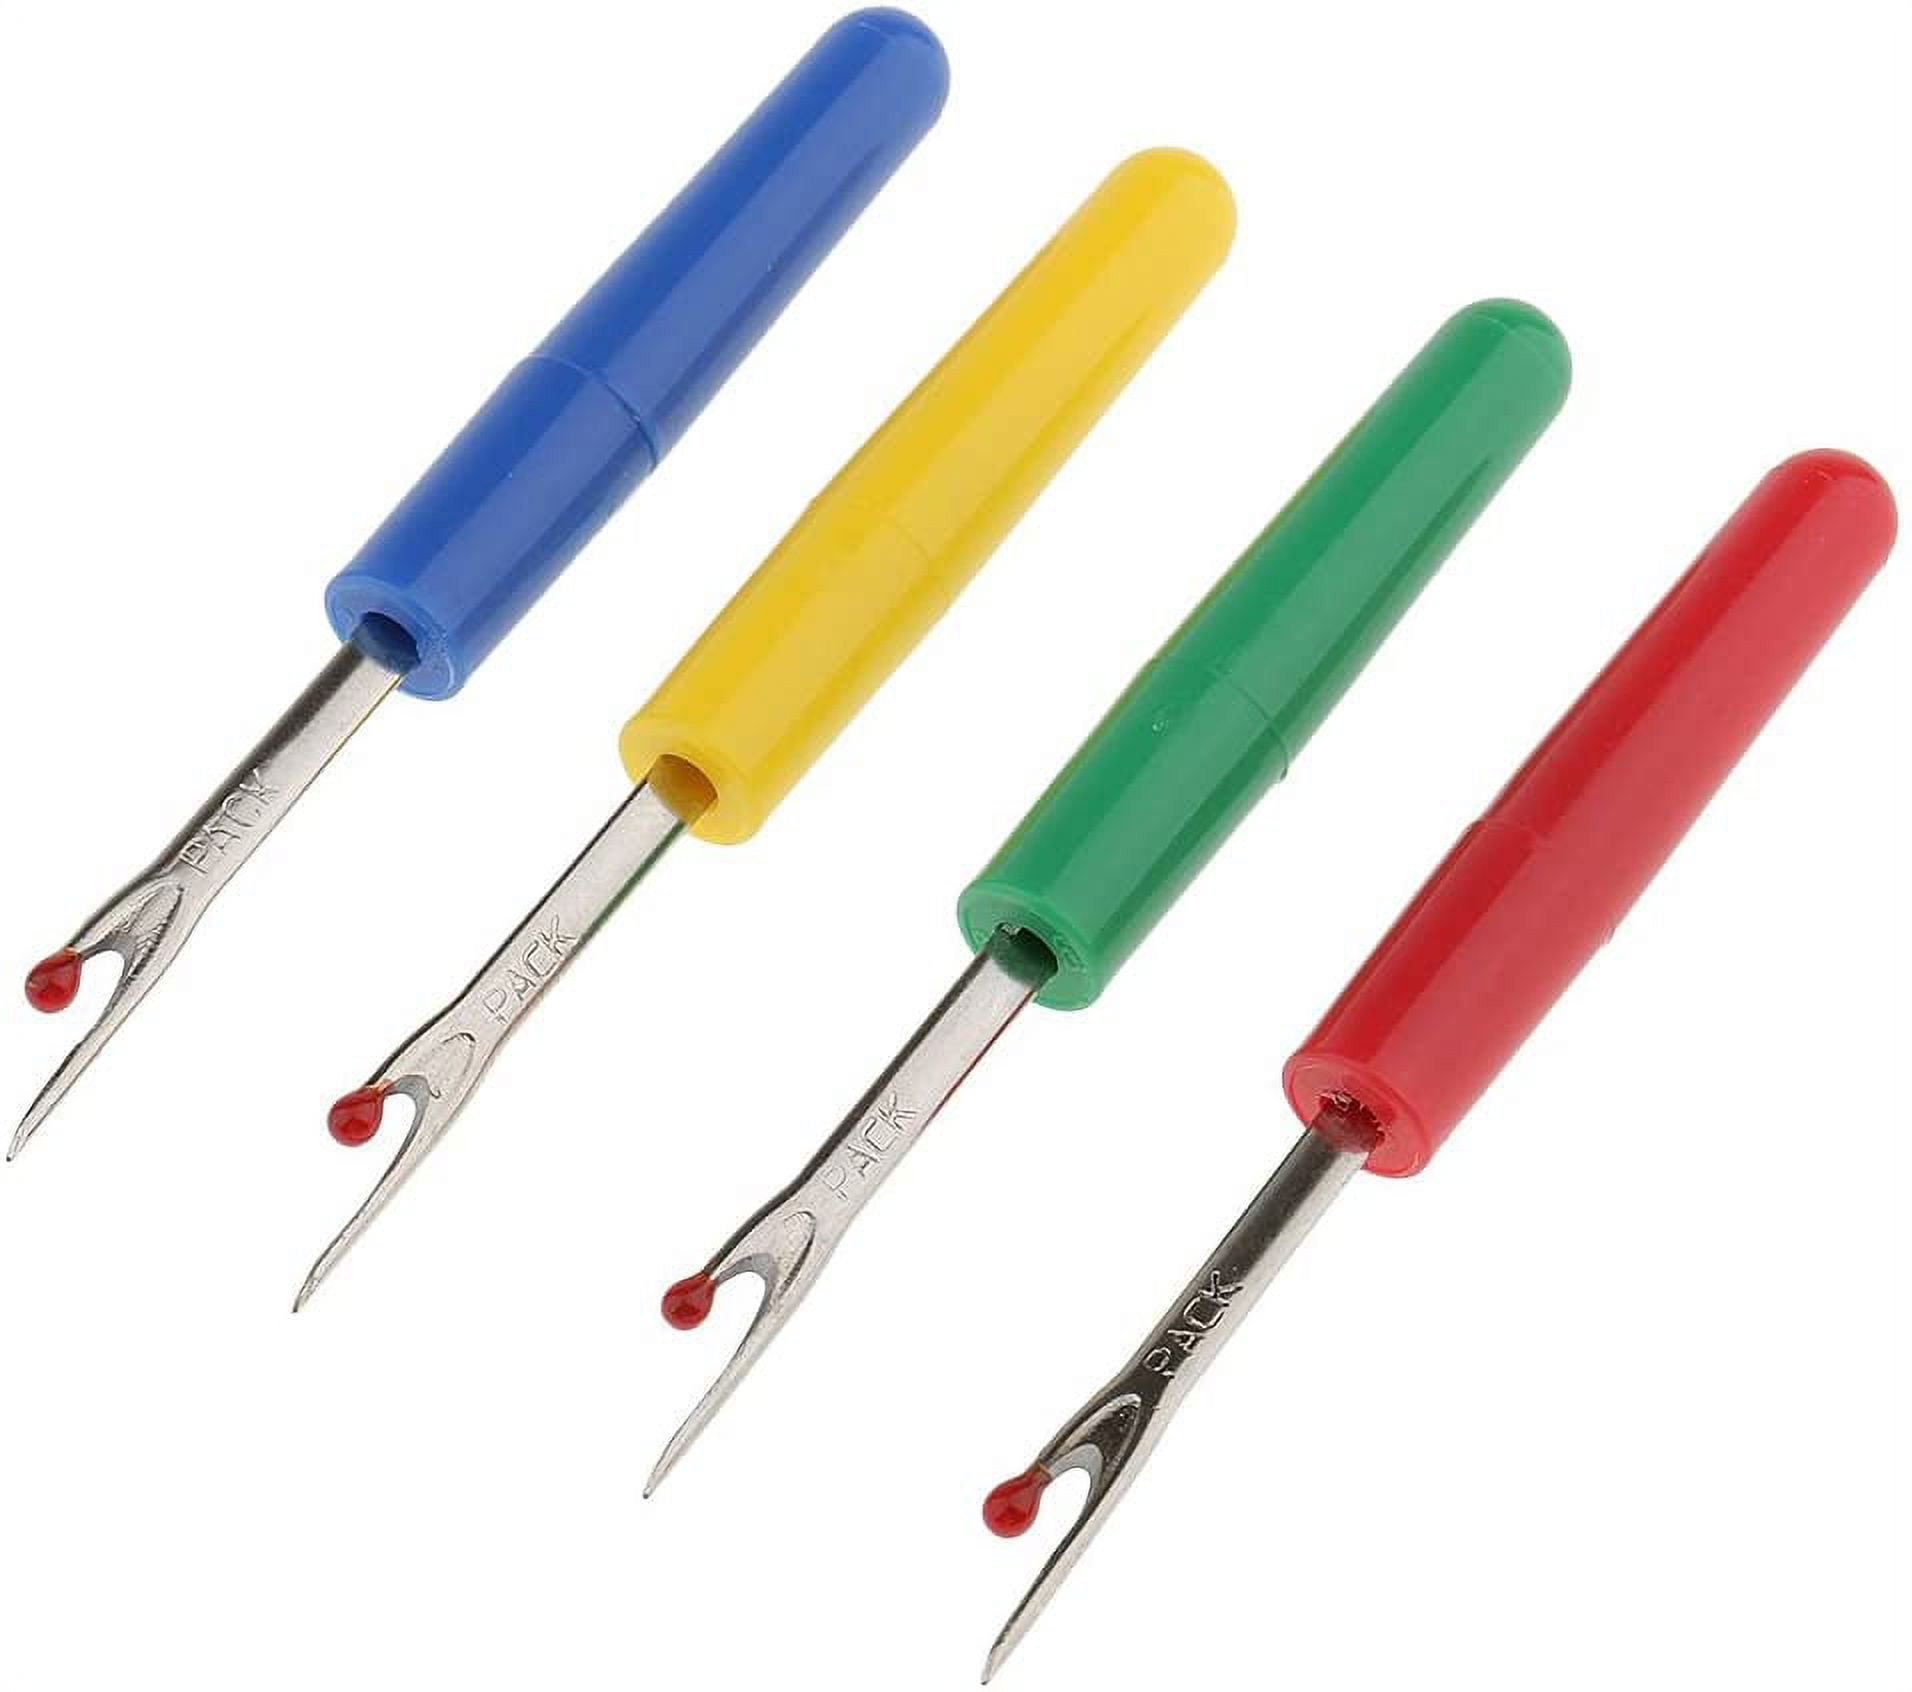 Kalolary 7 Pieces Sewing Seam Tool Sewing Stitch Thread Remover Sewing Seam  Ripper Kit for Sewing Crafting Removing Hems and Seams for Sewing/Crafting  Removing Threads